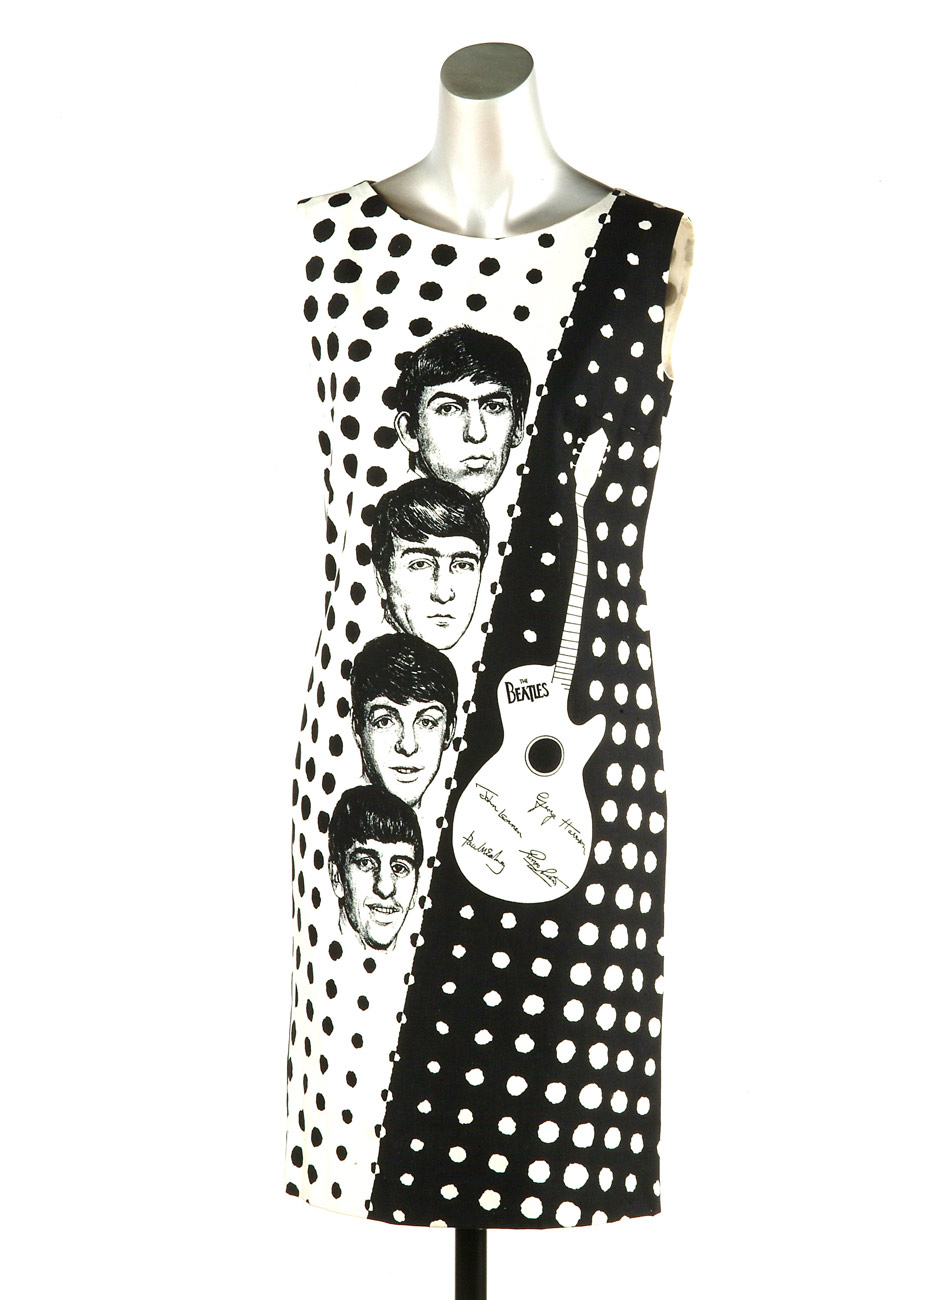 Dress created by fashion collective the Fool, displaying faces of the Beatles.